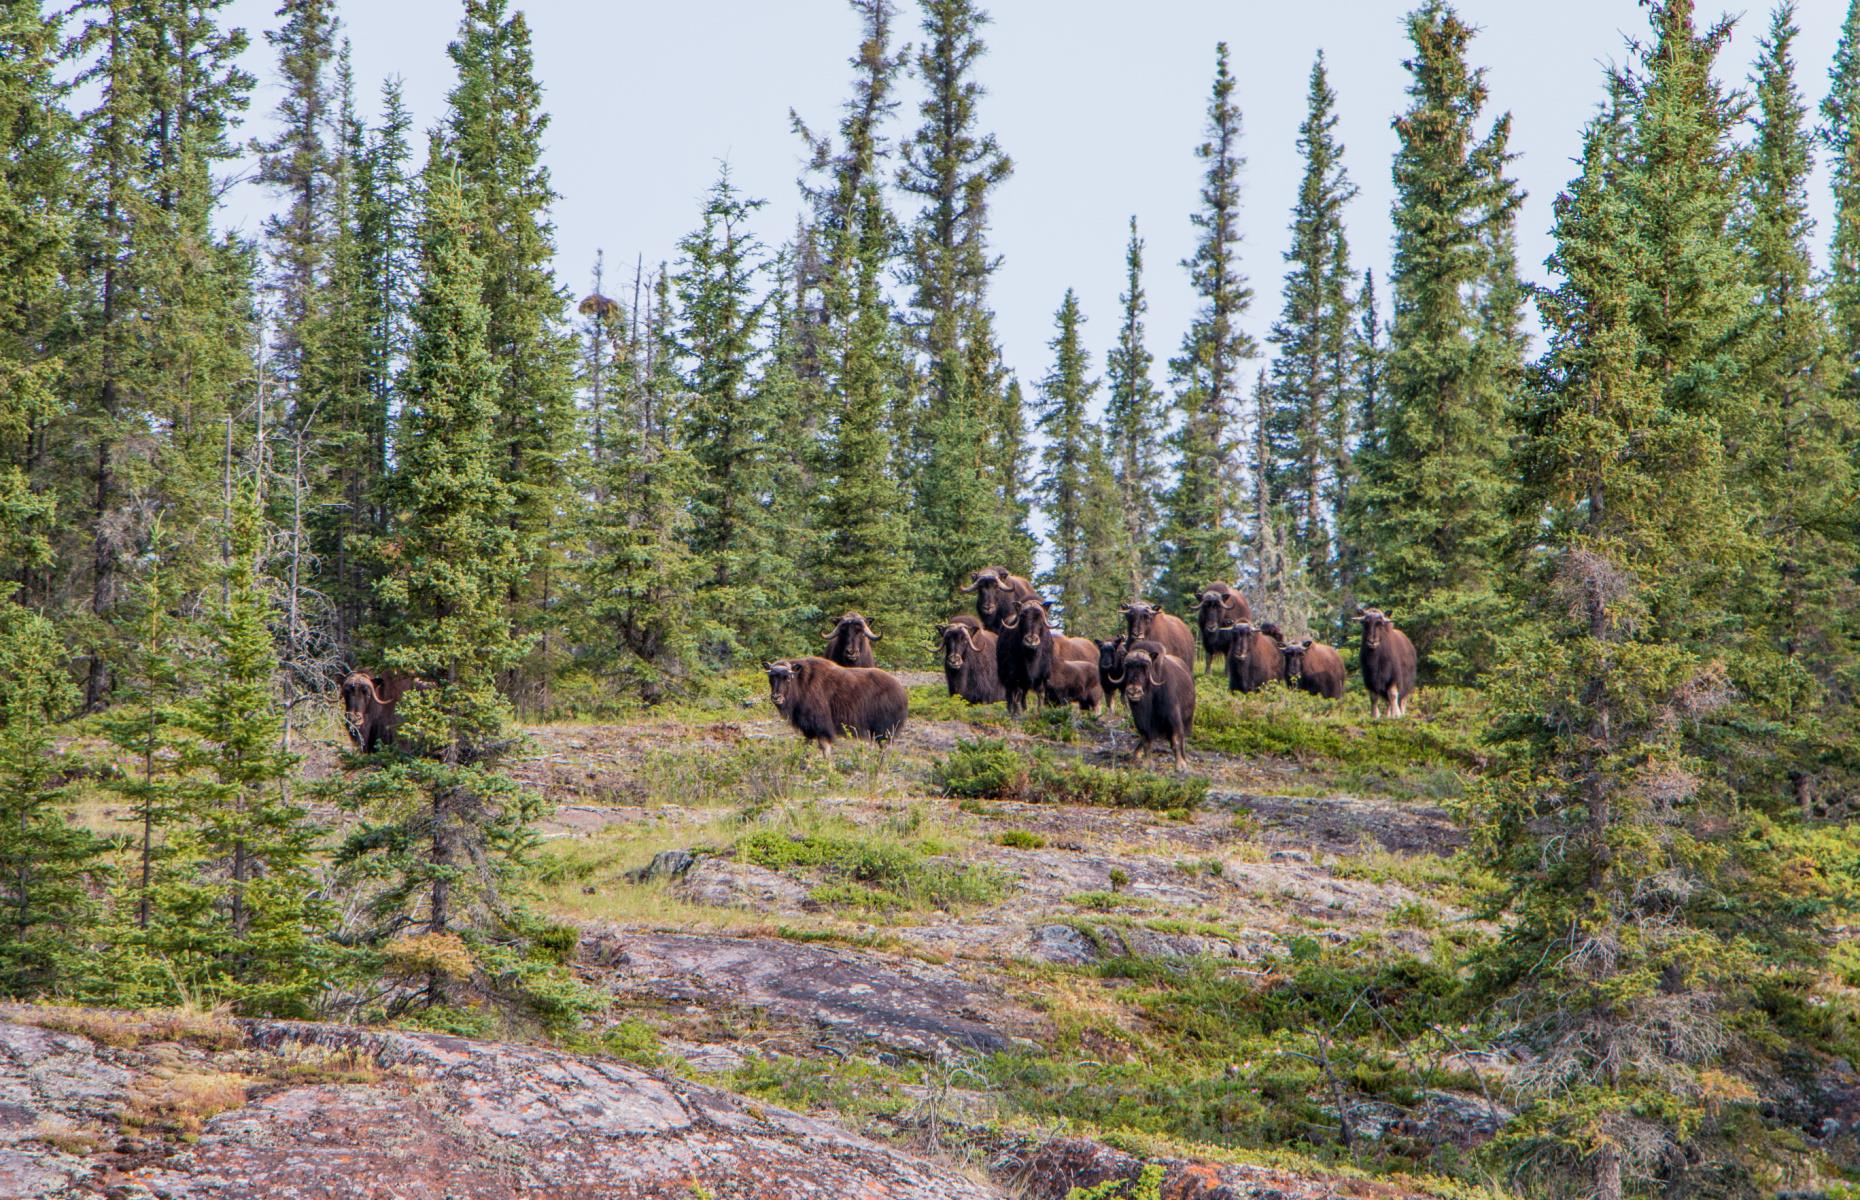 <p>Known as the “Land of the Ancestors,” this huge swathe of land in the eastern part of the Northwest Territories was established as a National Park Reserve in 2019, making it Canada's <a href="https://parks.canada.ca/pn-np/nt/thaidene-nene/activ/peche-fishing">newest National Park Reserve</a>. Thaidene Nene’s main feature is its combination of subarctic boreal forest and proximity to the massive Great Slave Lake. This makes for excellent fishing (under the midnight sun in the summer) and the chance to spot plenty of protected wildlife.</p>  <p><a href="https://www.loveexploring.com/galleries/69233/canadas-most-stunning-unknown-lakes?page=1"><strong>Canada's most stunning unknown lakes</strong></a></p>